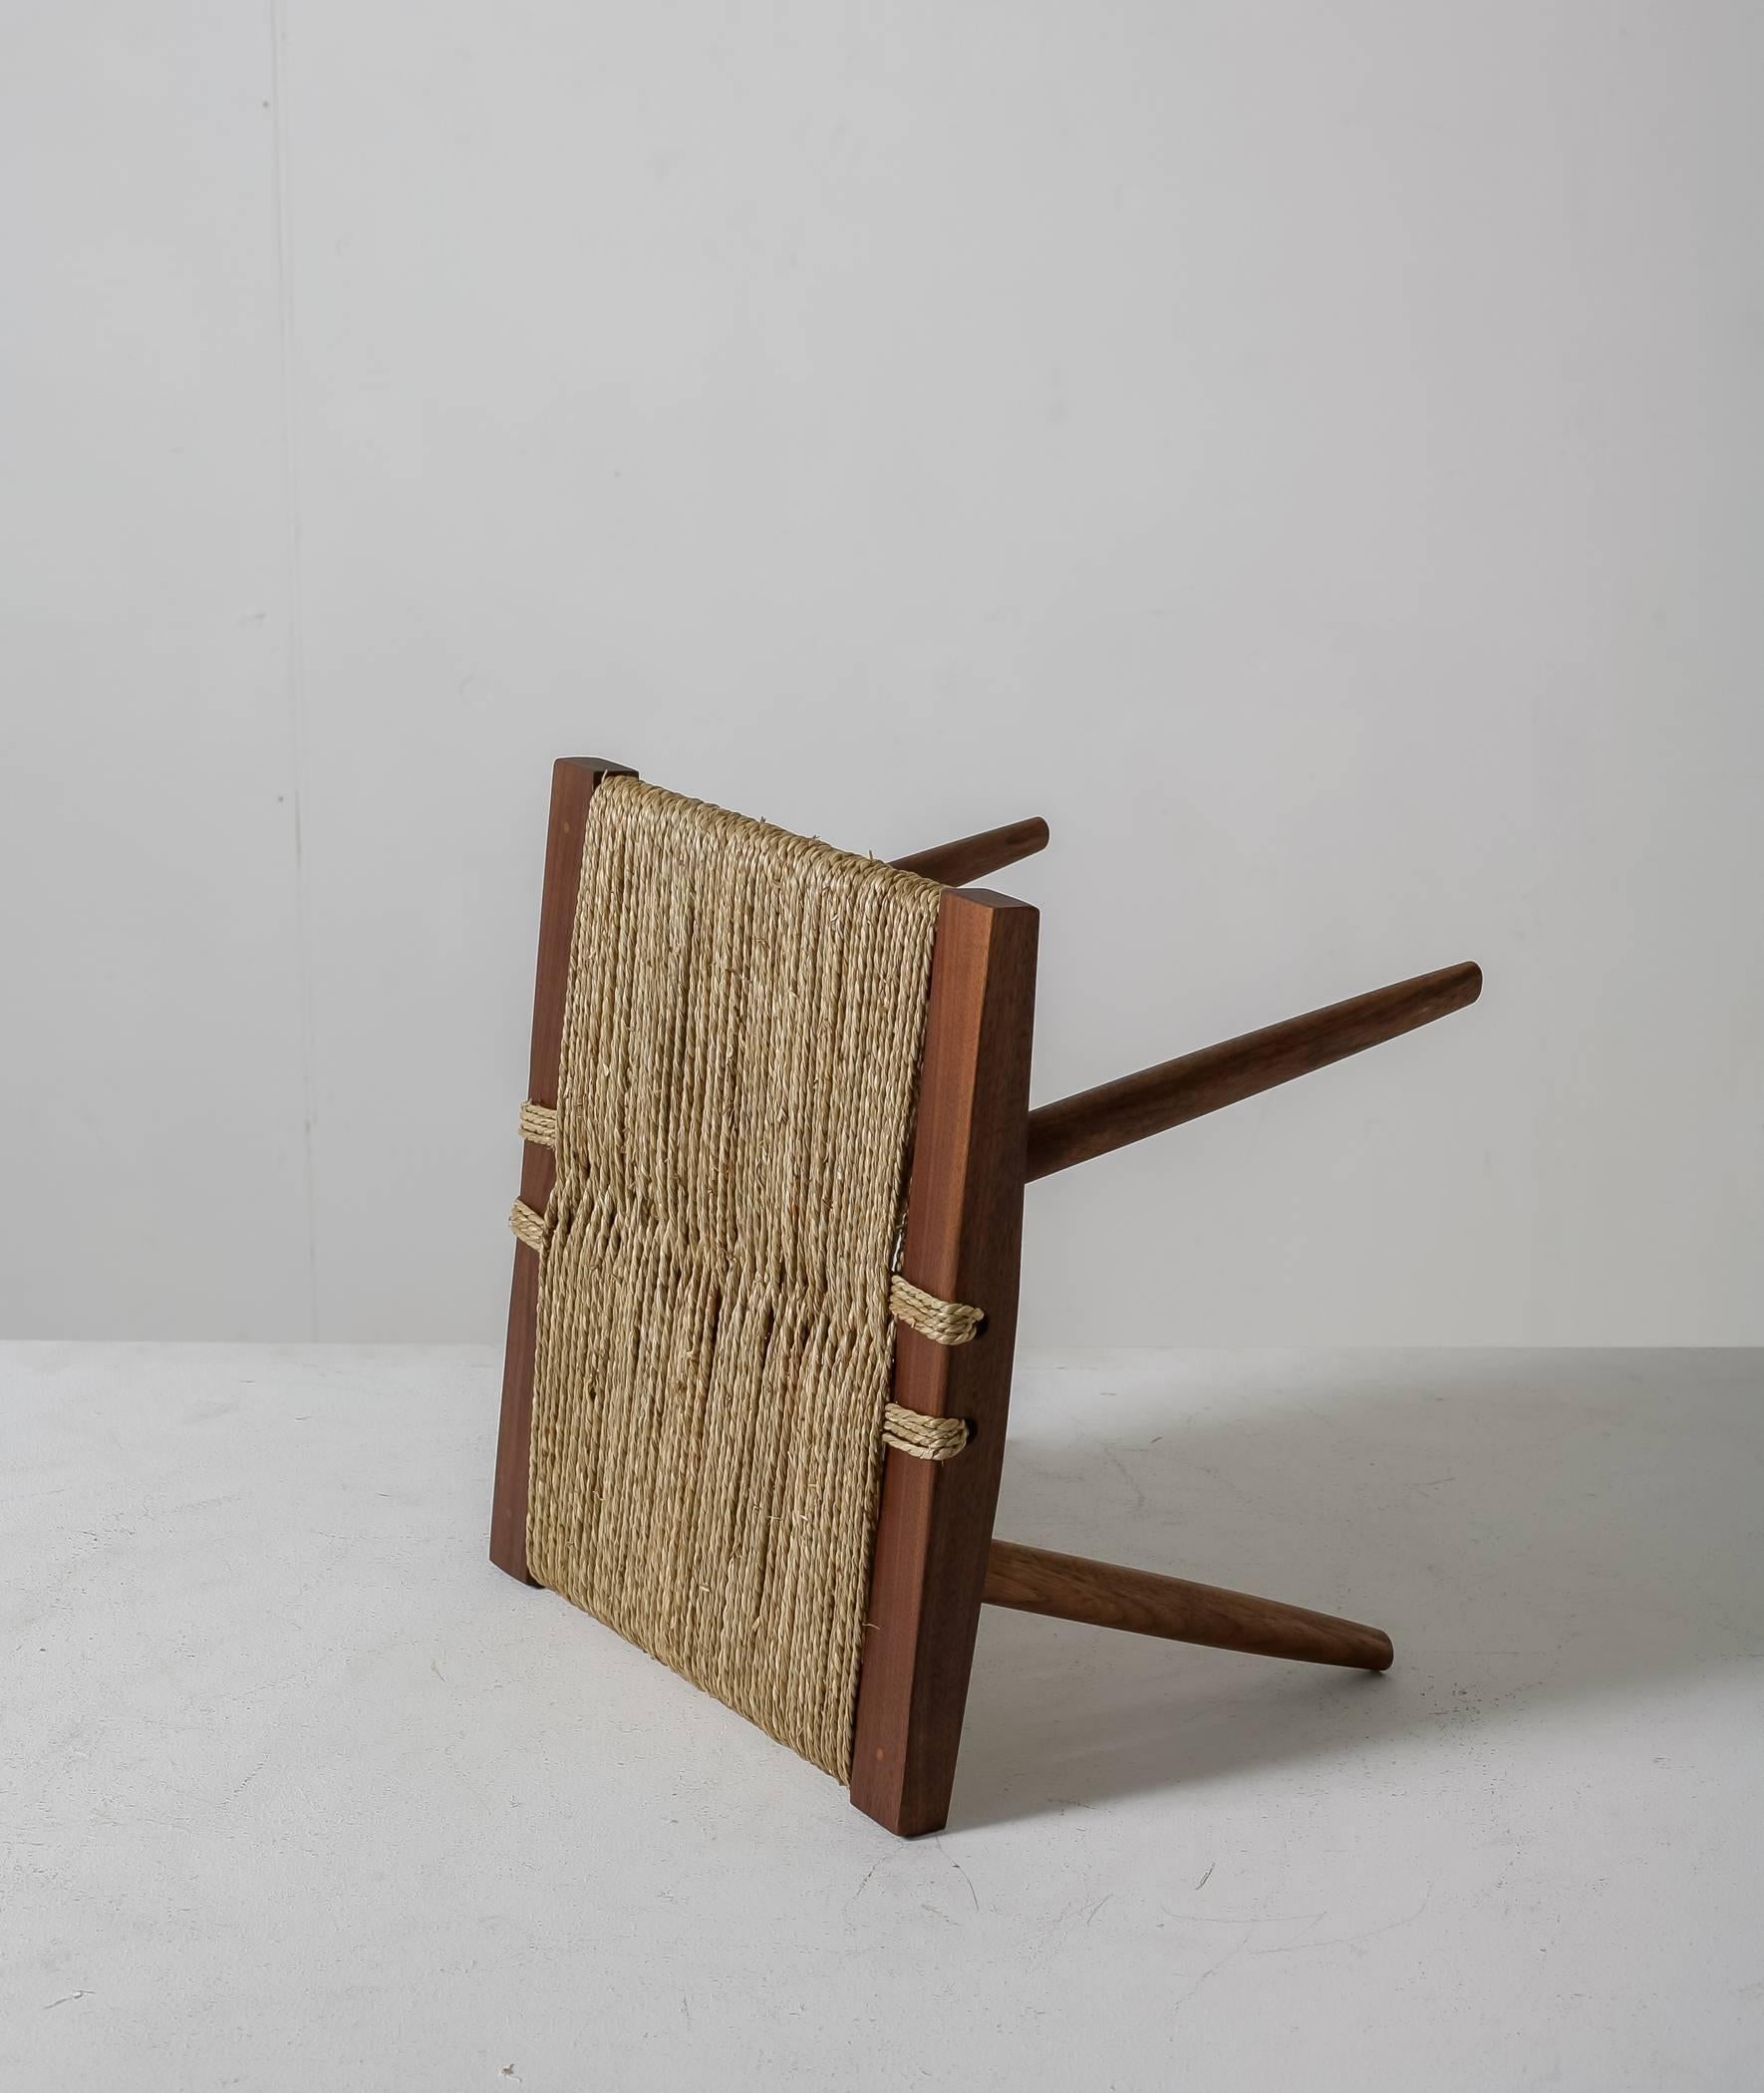 American Craftsman George Nakashima Walnut with Grass Rope Stool, USA, 1950s For Sale